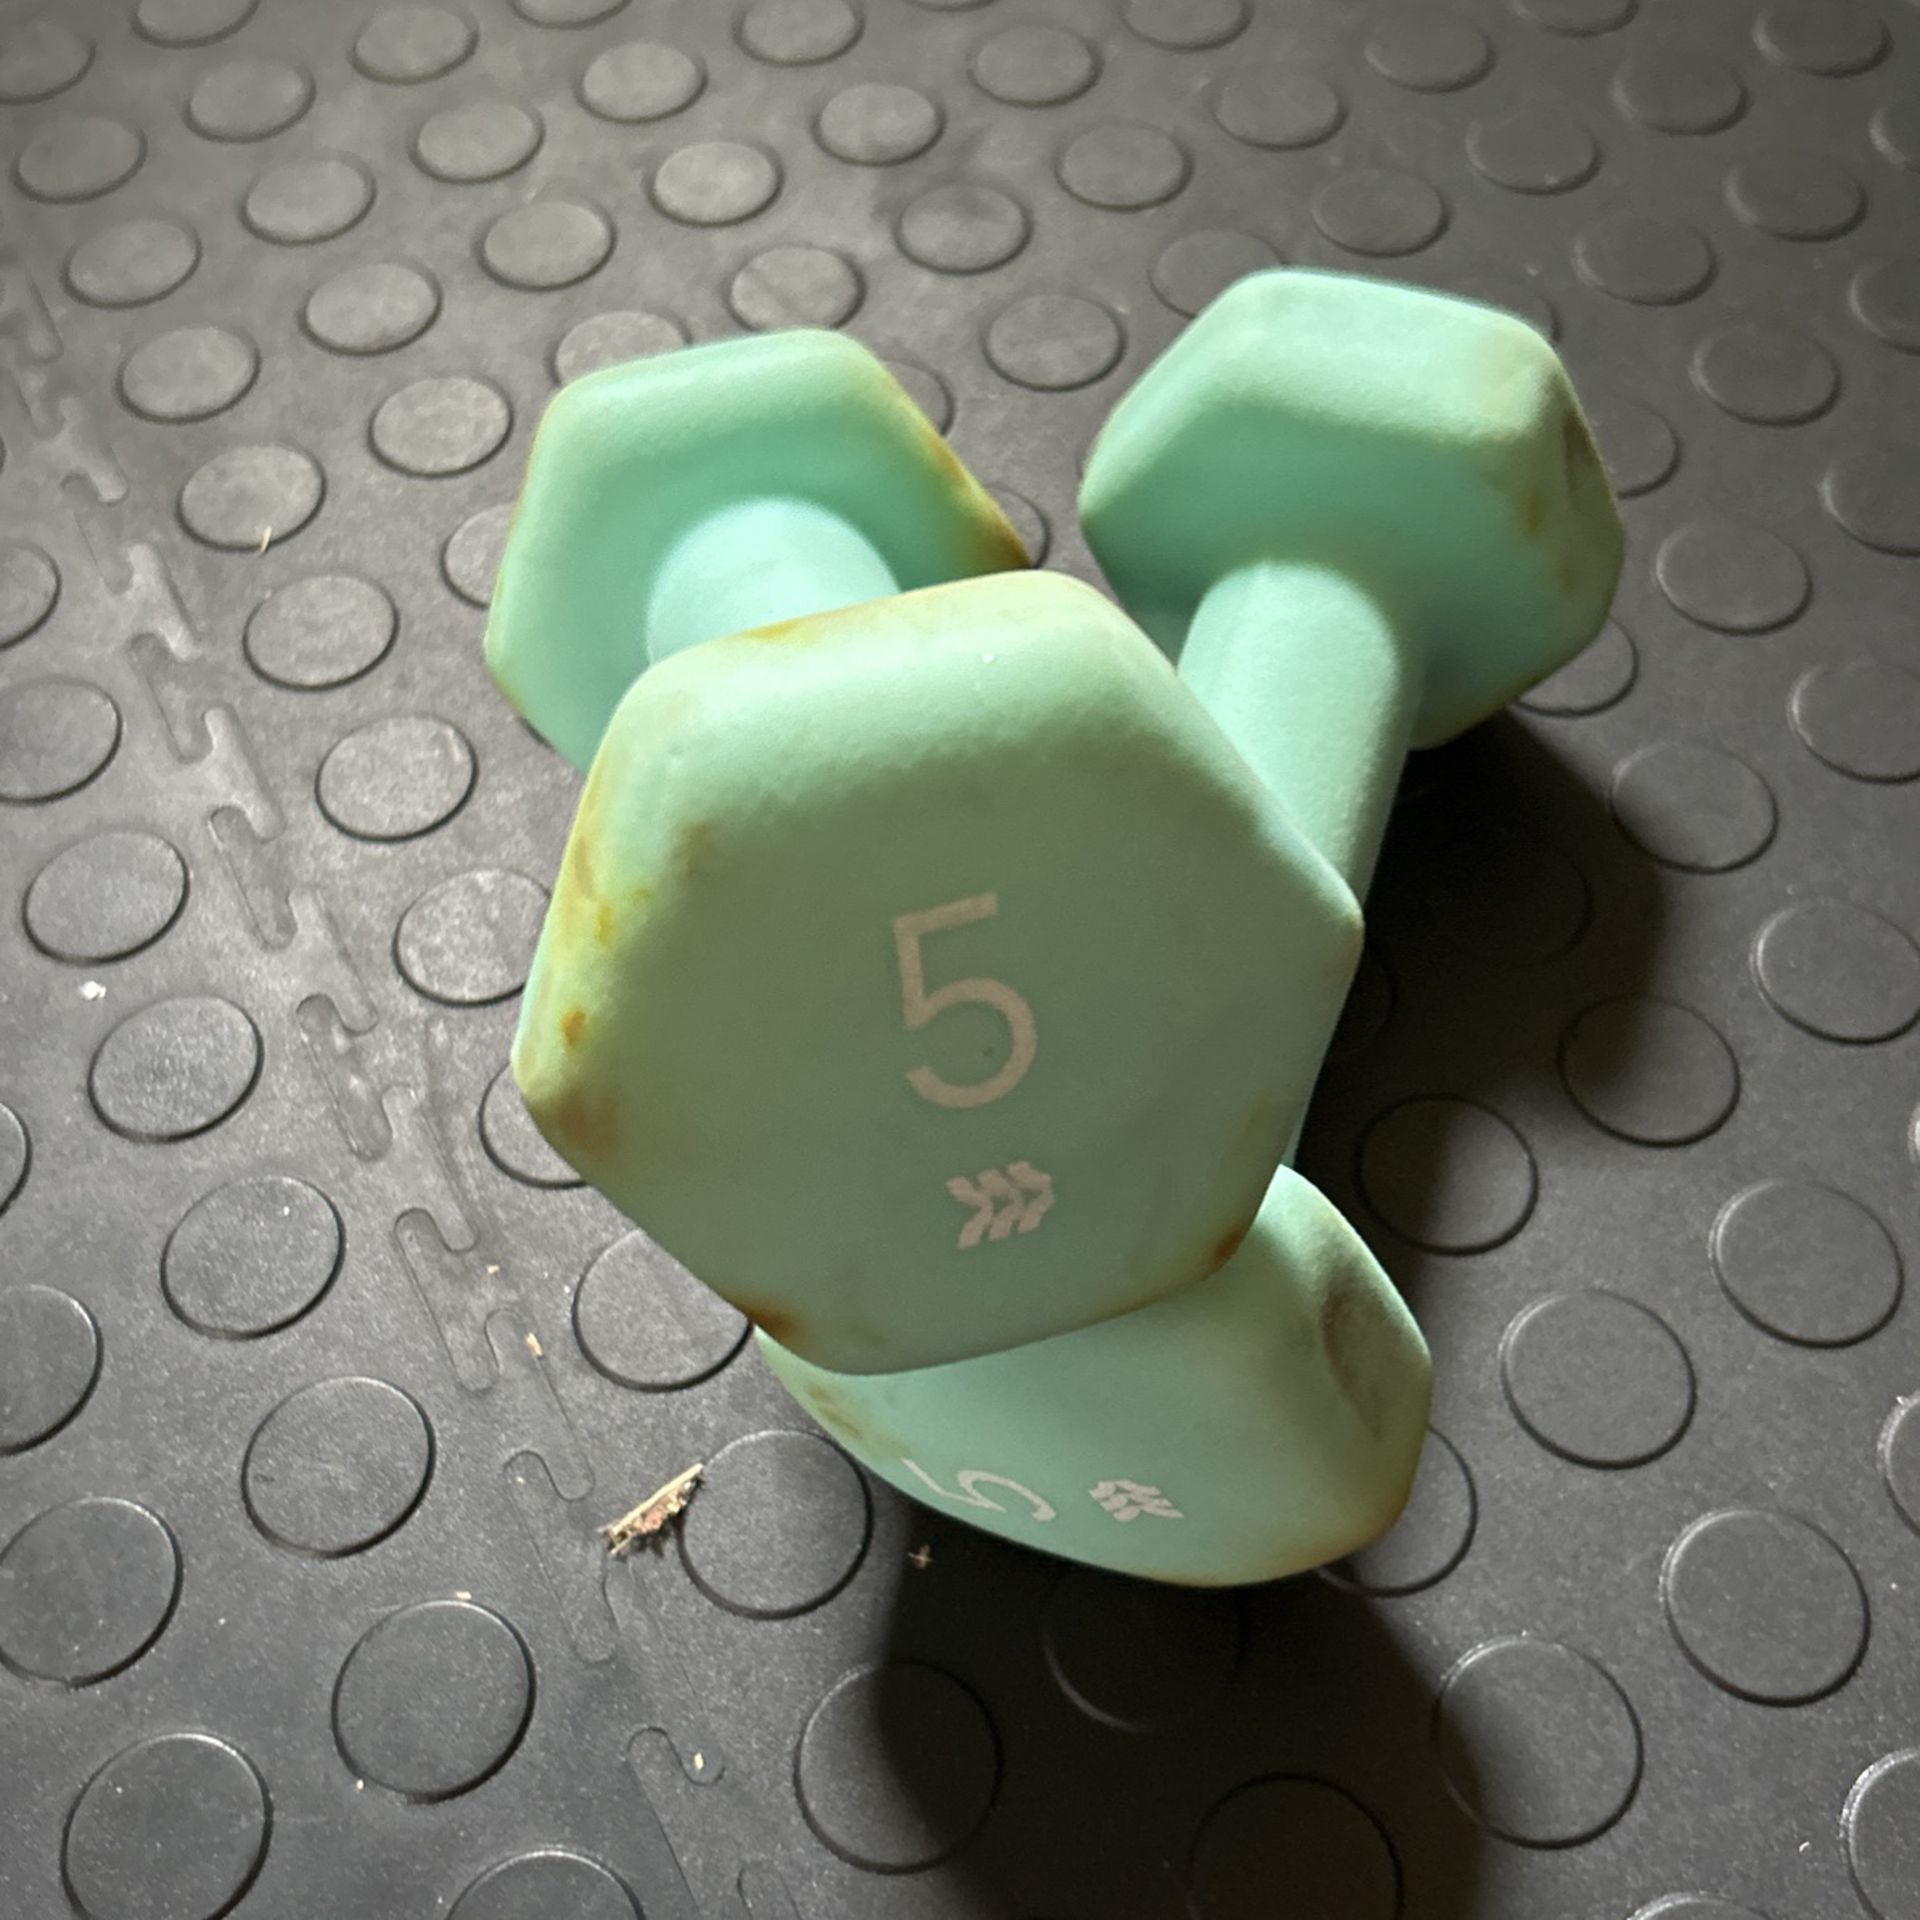 5 Lb Weighs Perfect For Aerobics Or A Quick Workout